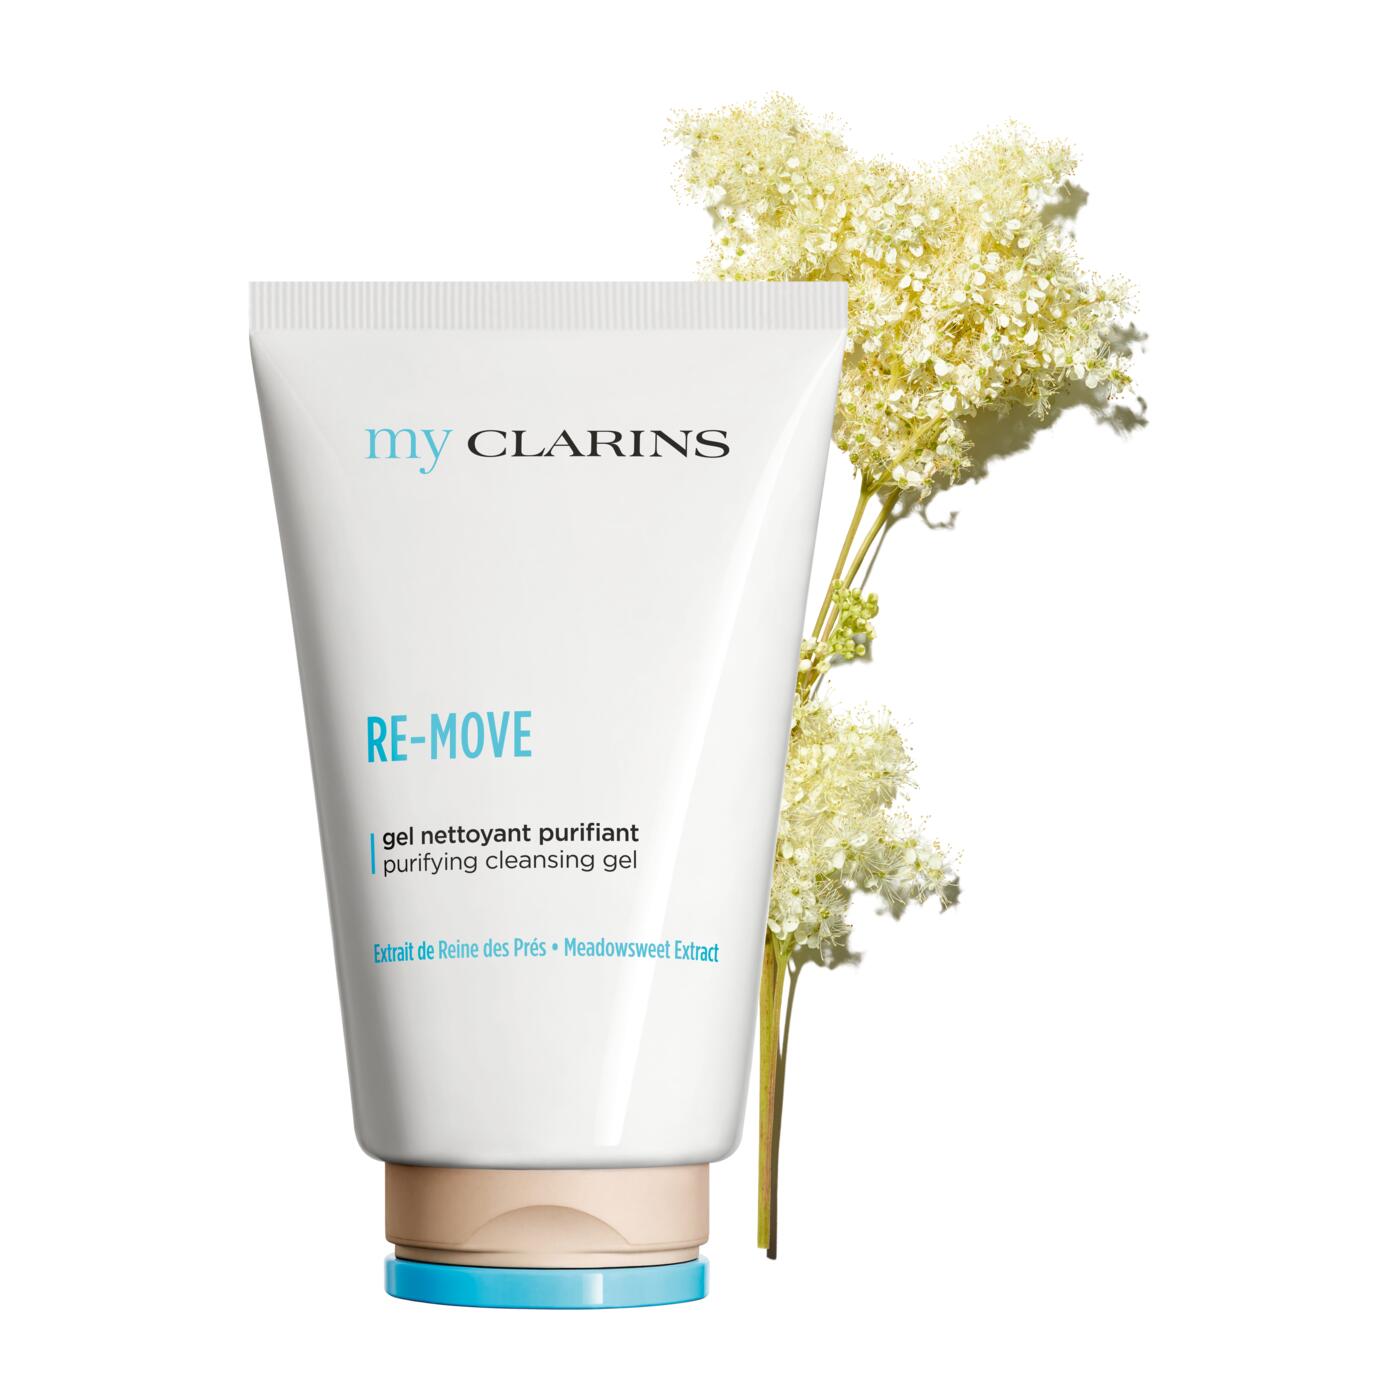 My Clarins - Facial Skincare Products for All Skin Types, Clarins Face  Creams, Serums, & More